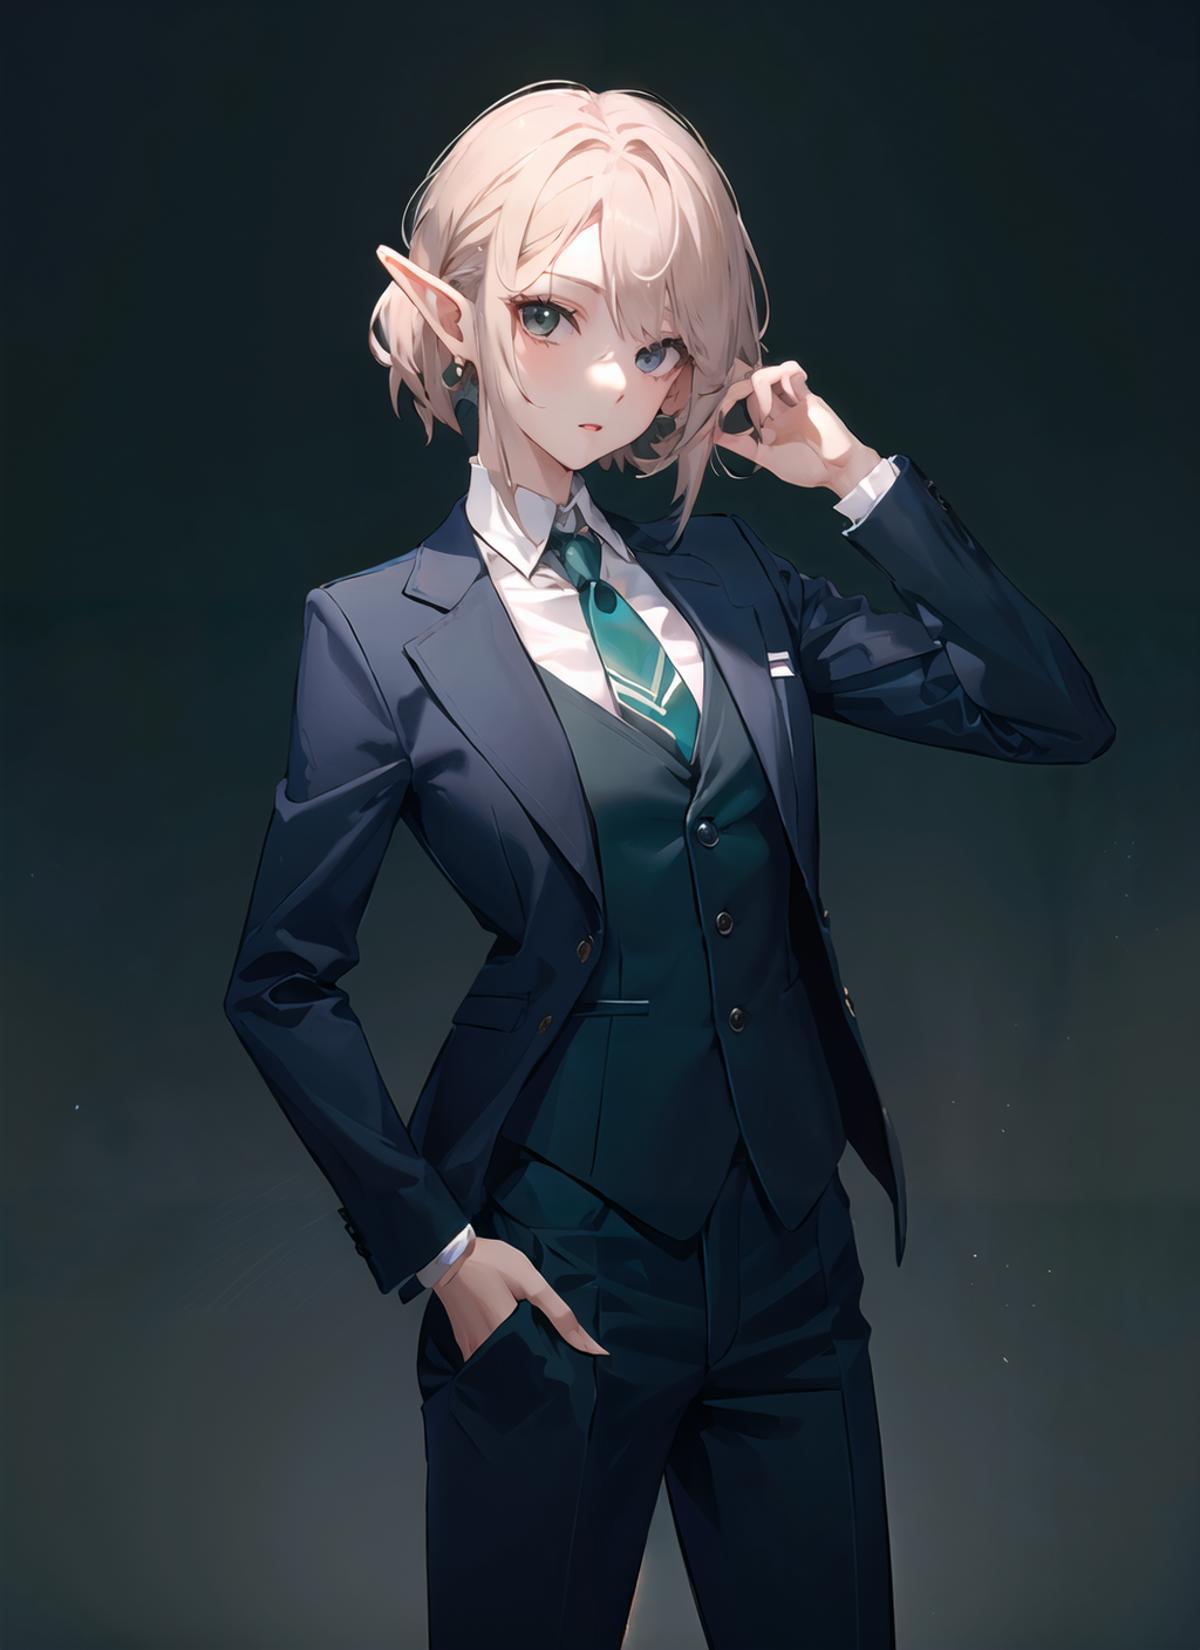 Woman Business Suit image by Nontime